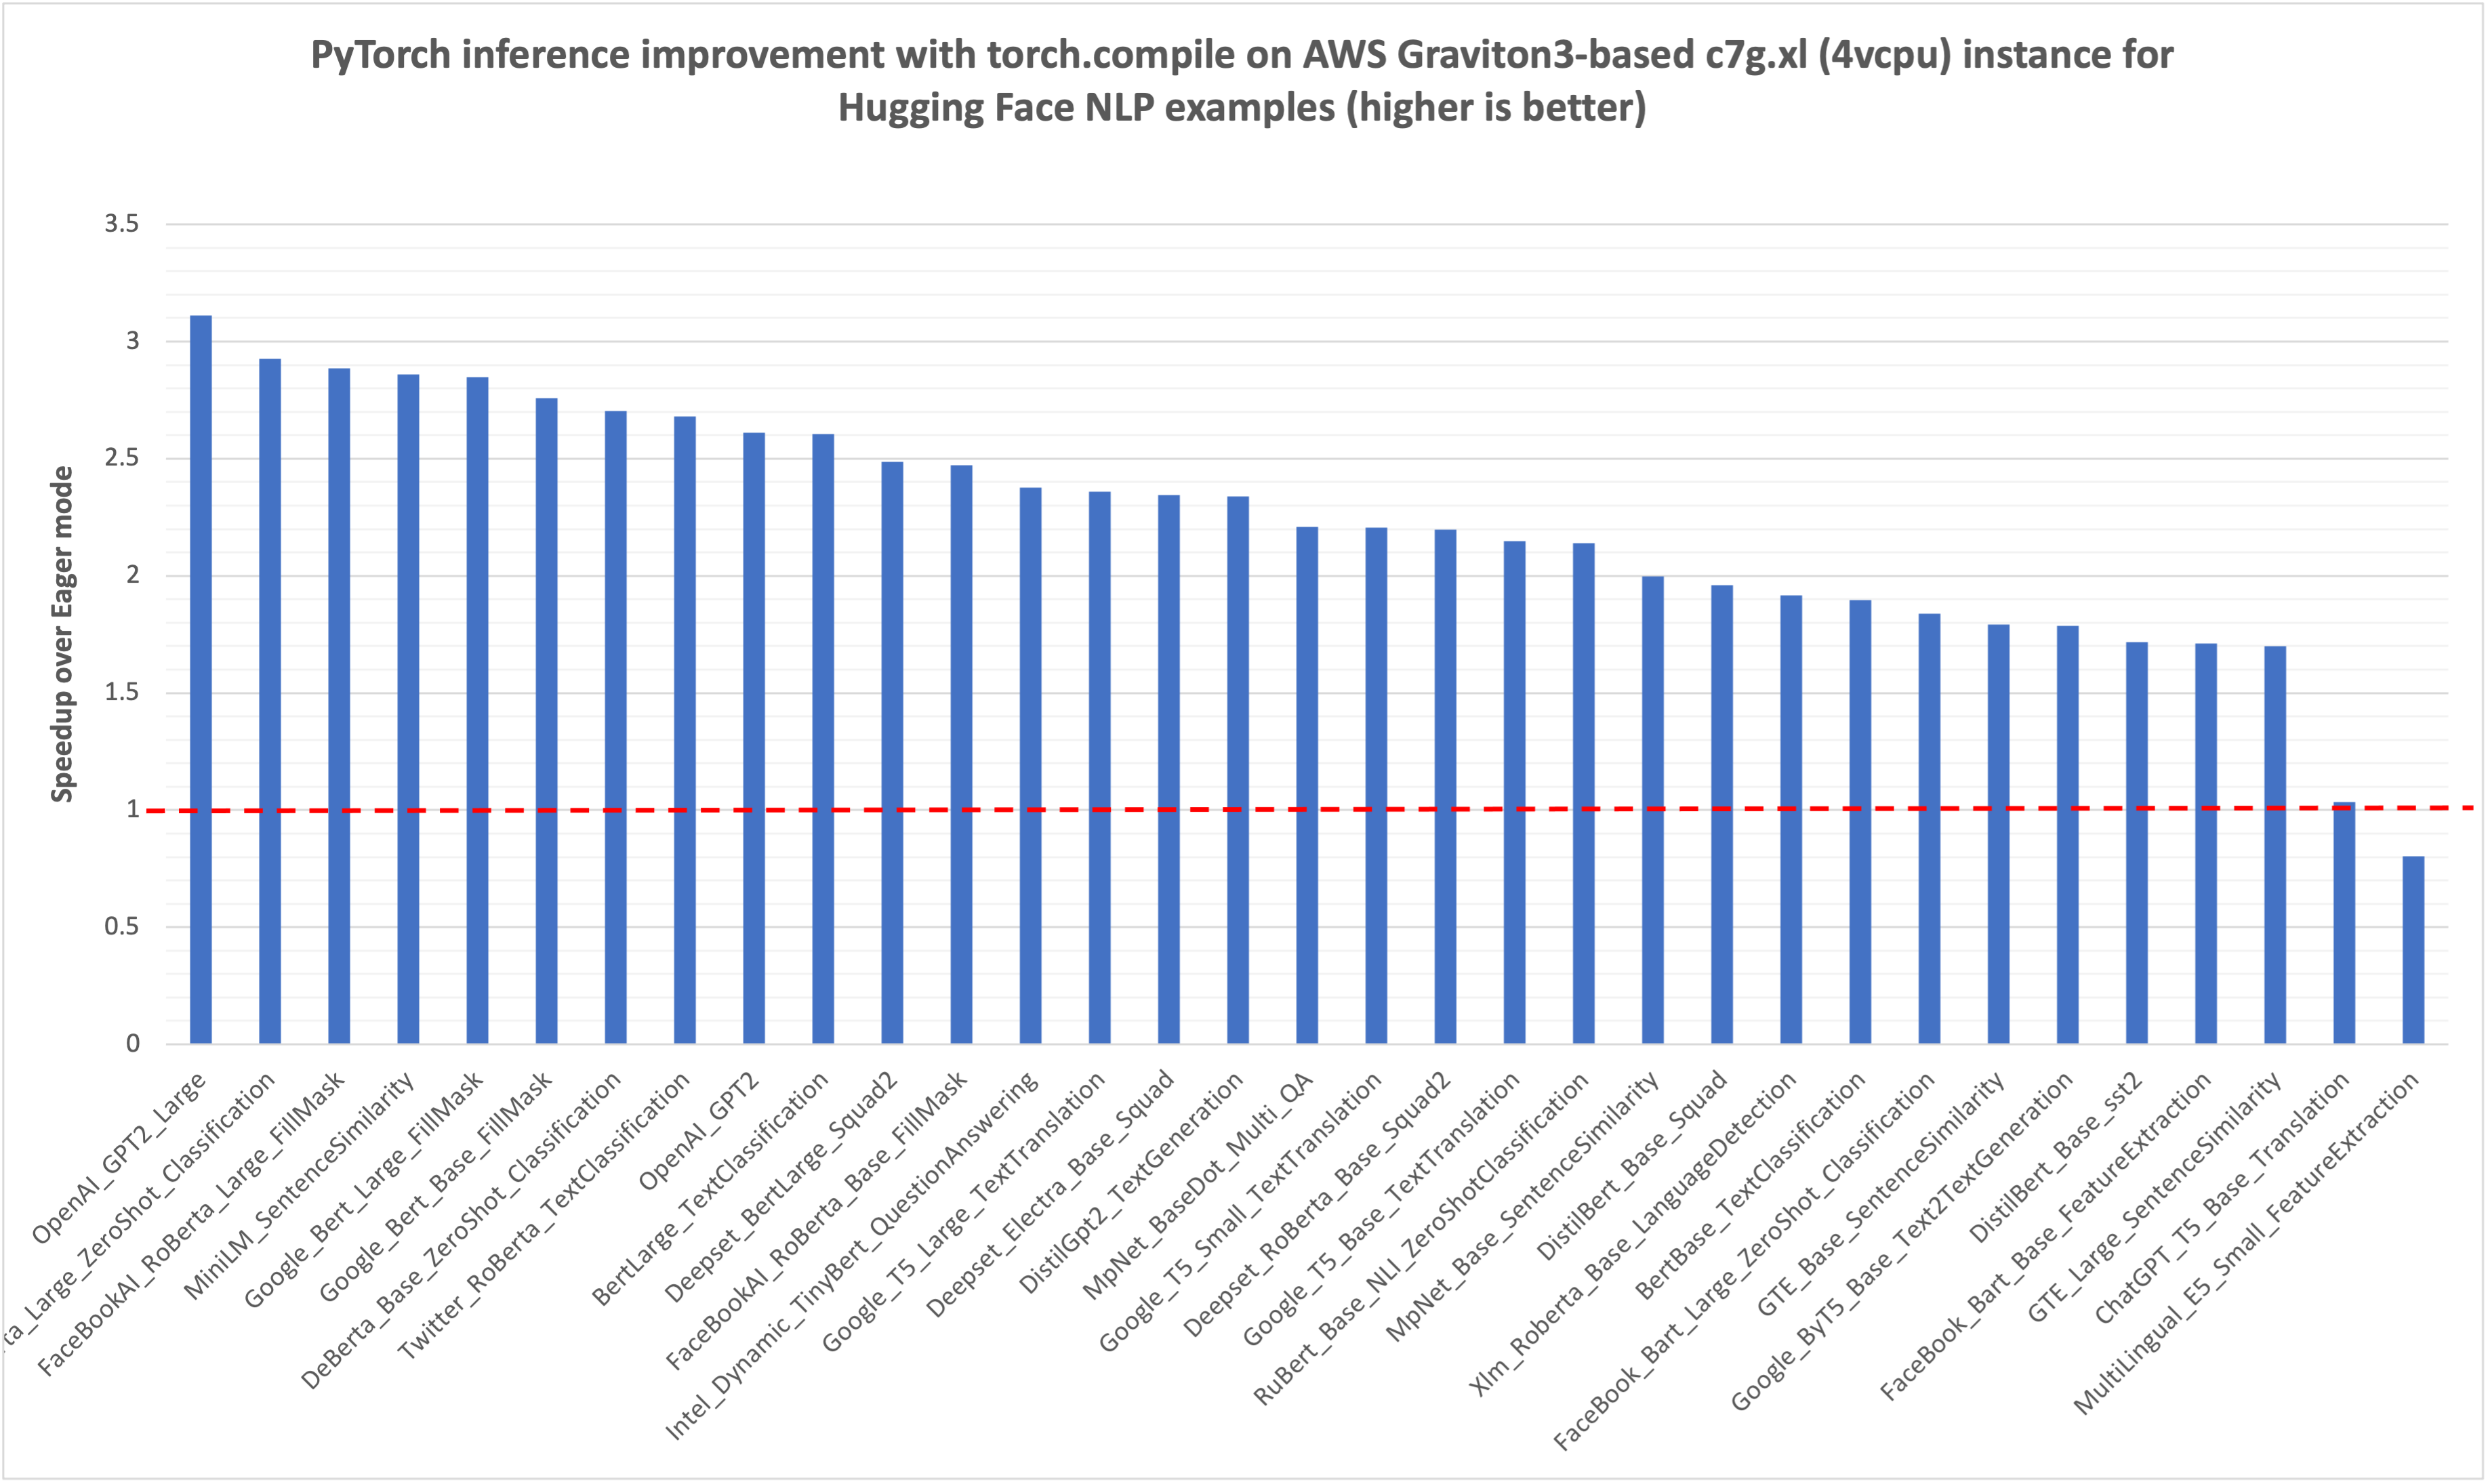 Hugging Face NLP model inference performance improvement with torch.compile on AWS Graviton3-based c7g instance using Hugging Face example scripts